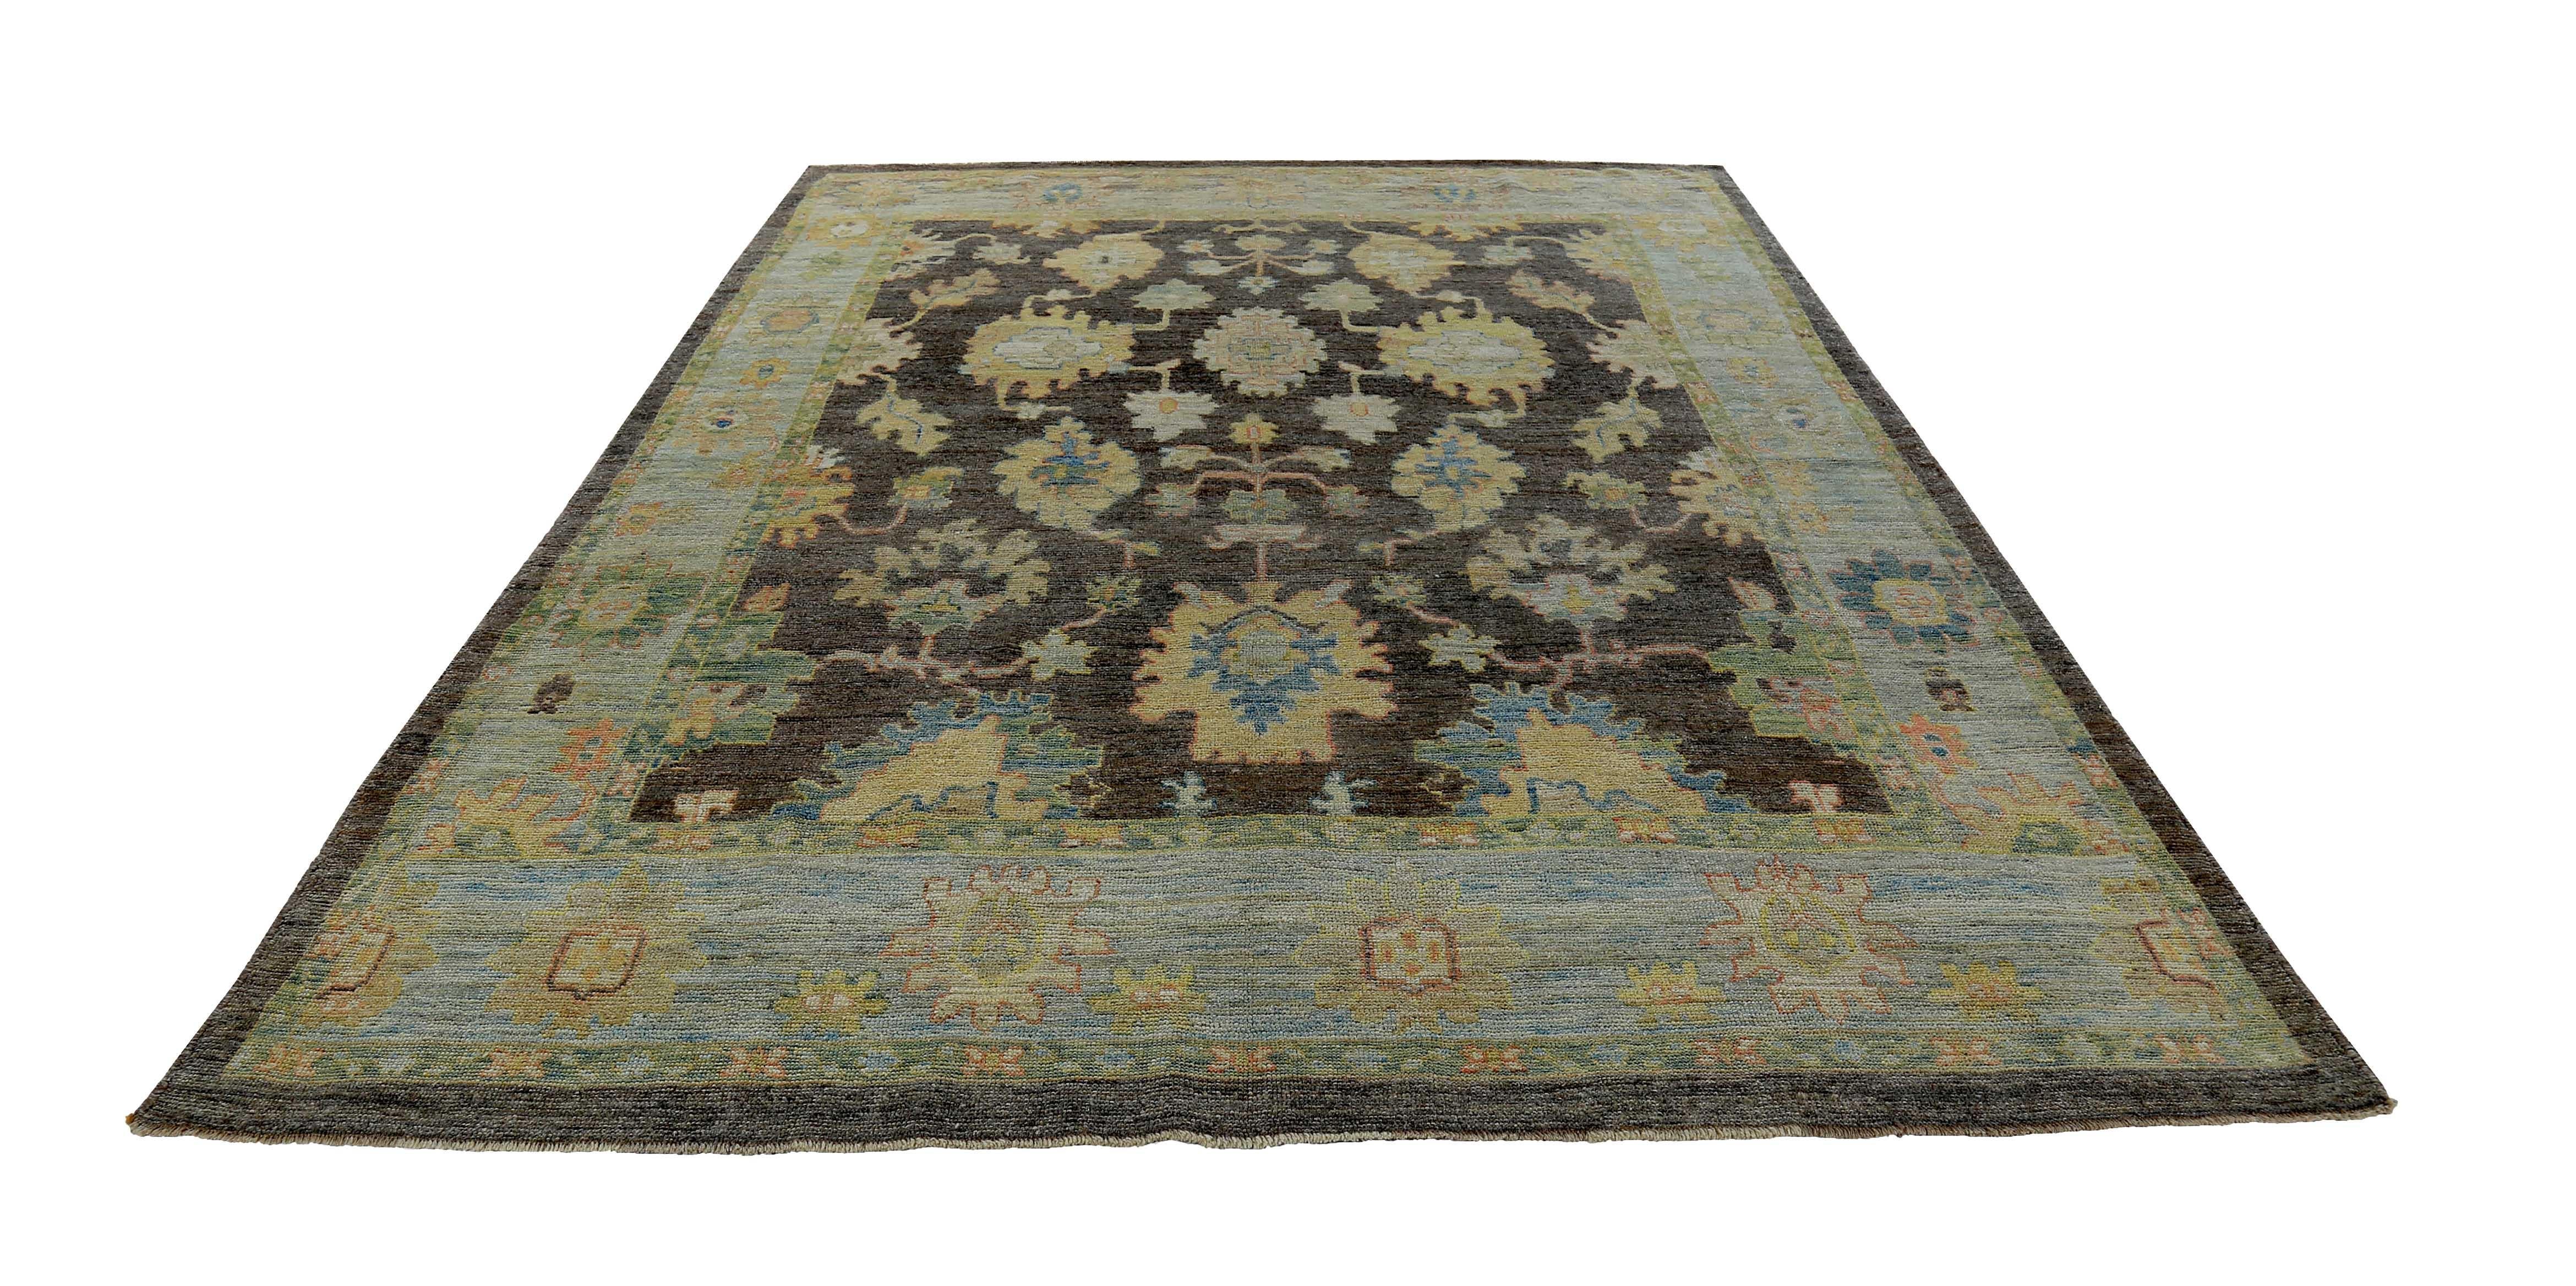 New Turkish rug made of handwoven sheep’s wool of the finest quality. It’s colored with organic vegetable dyes that are certified safe for humans and pets alike. It features gold and blue floral details on a lovely brown and ivory field. Flower